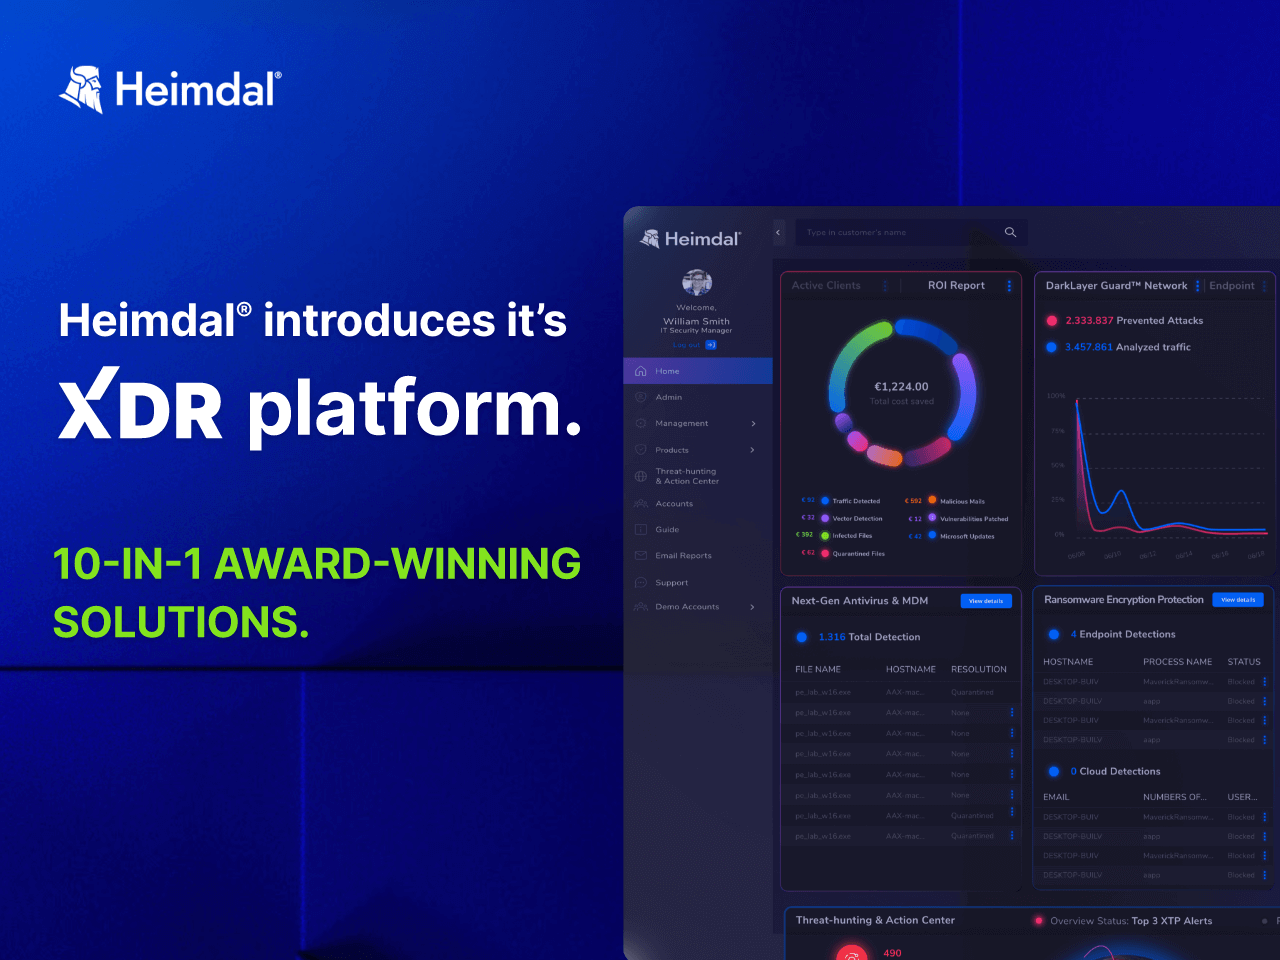 Introducing Heimdal XDR: A Game-Changer Disrupting the Market with the Widest Range of Next-Generation Solutions